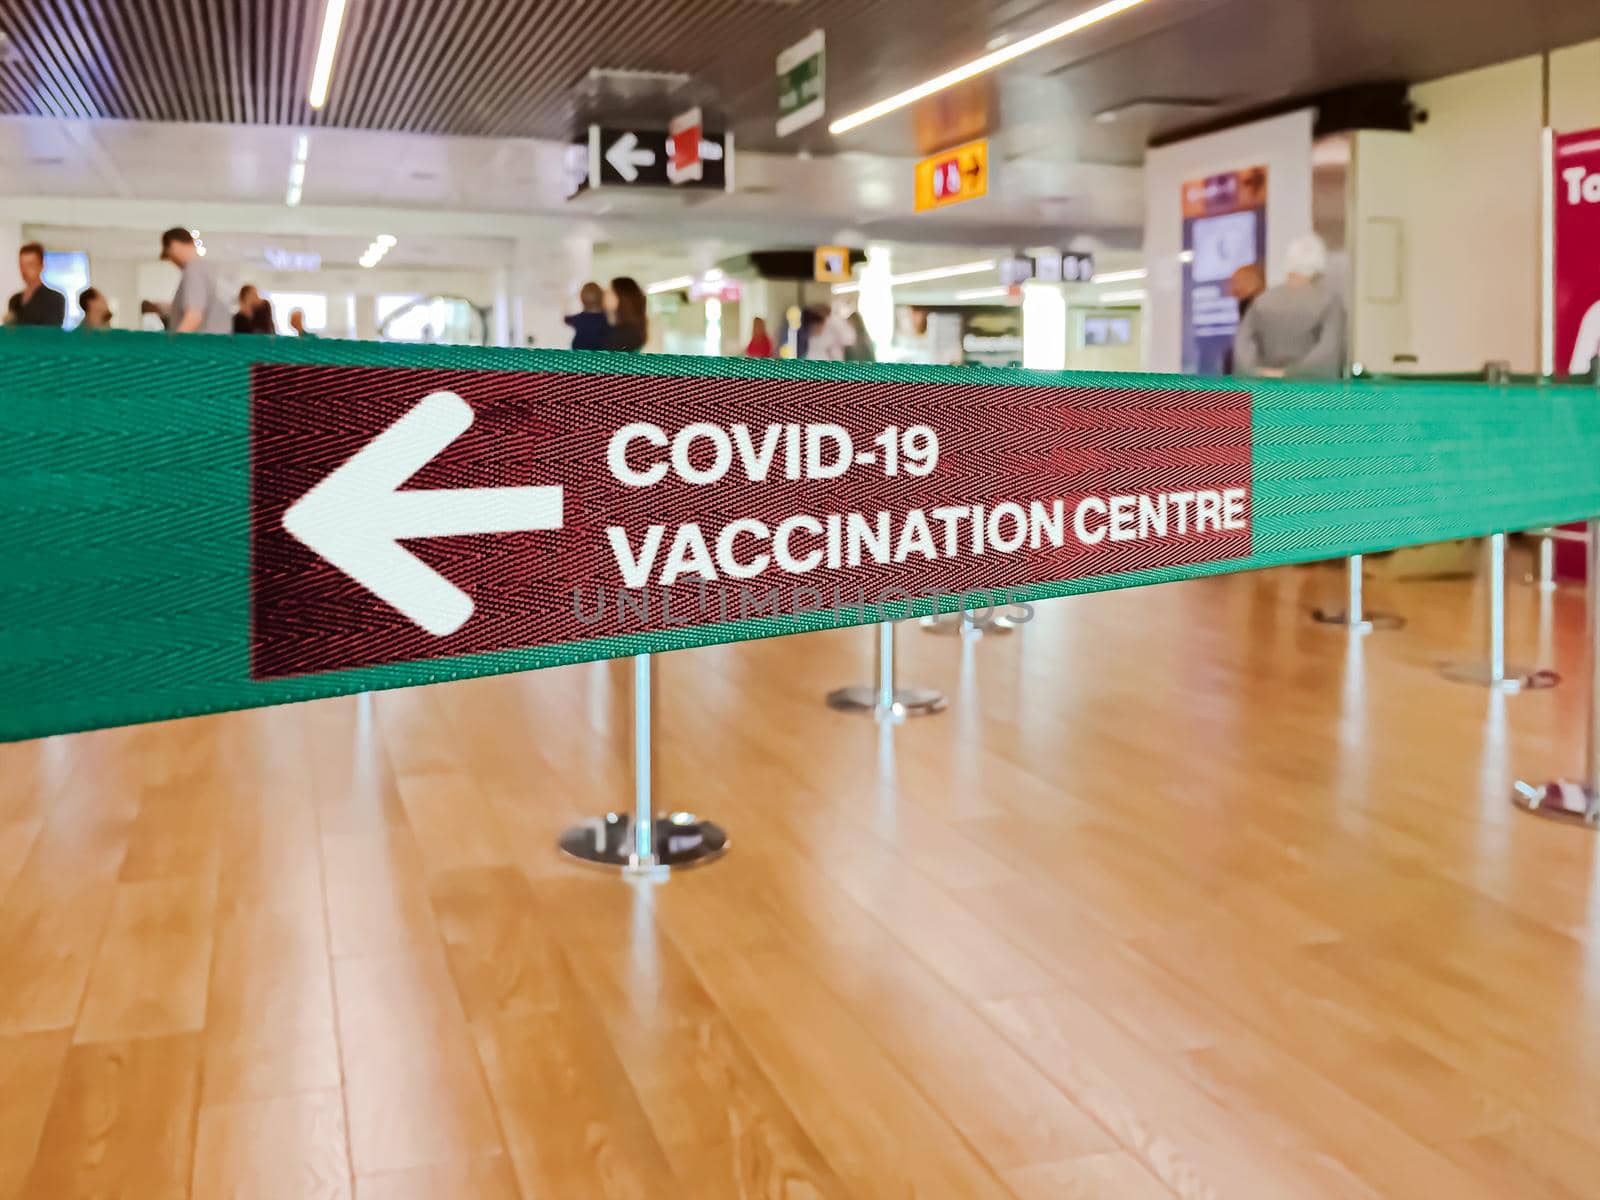 Green ribbon with a left arrow to indicate the Covid-19 vaccination centre by rarrarorro